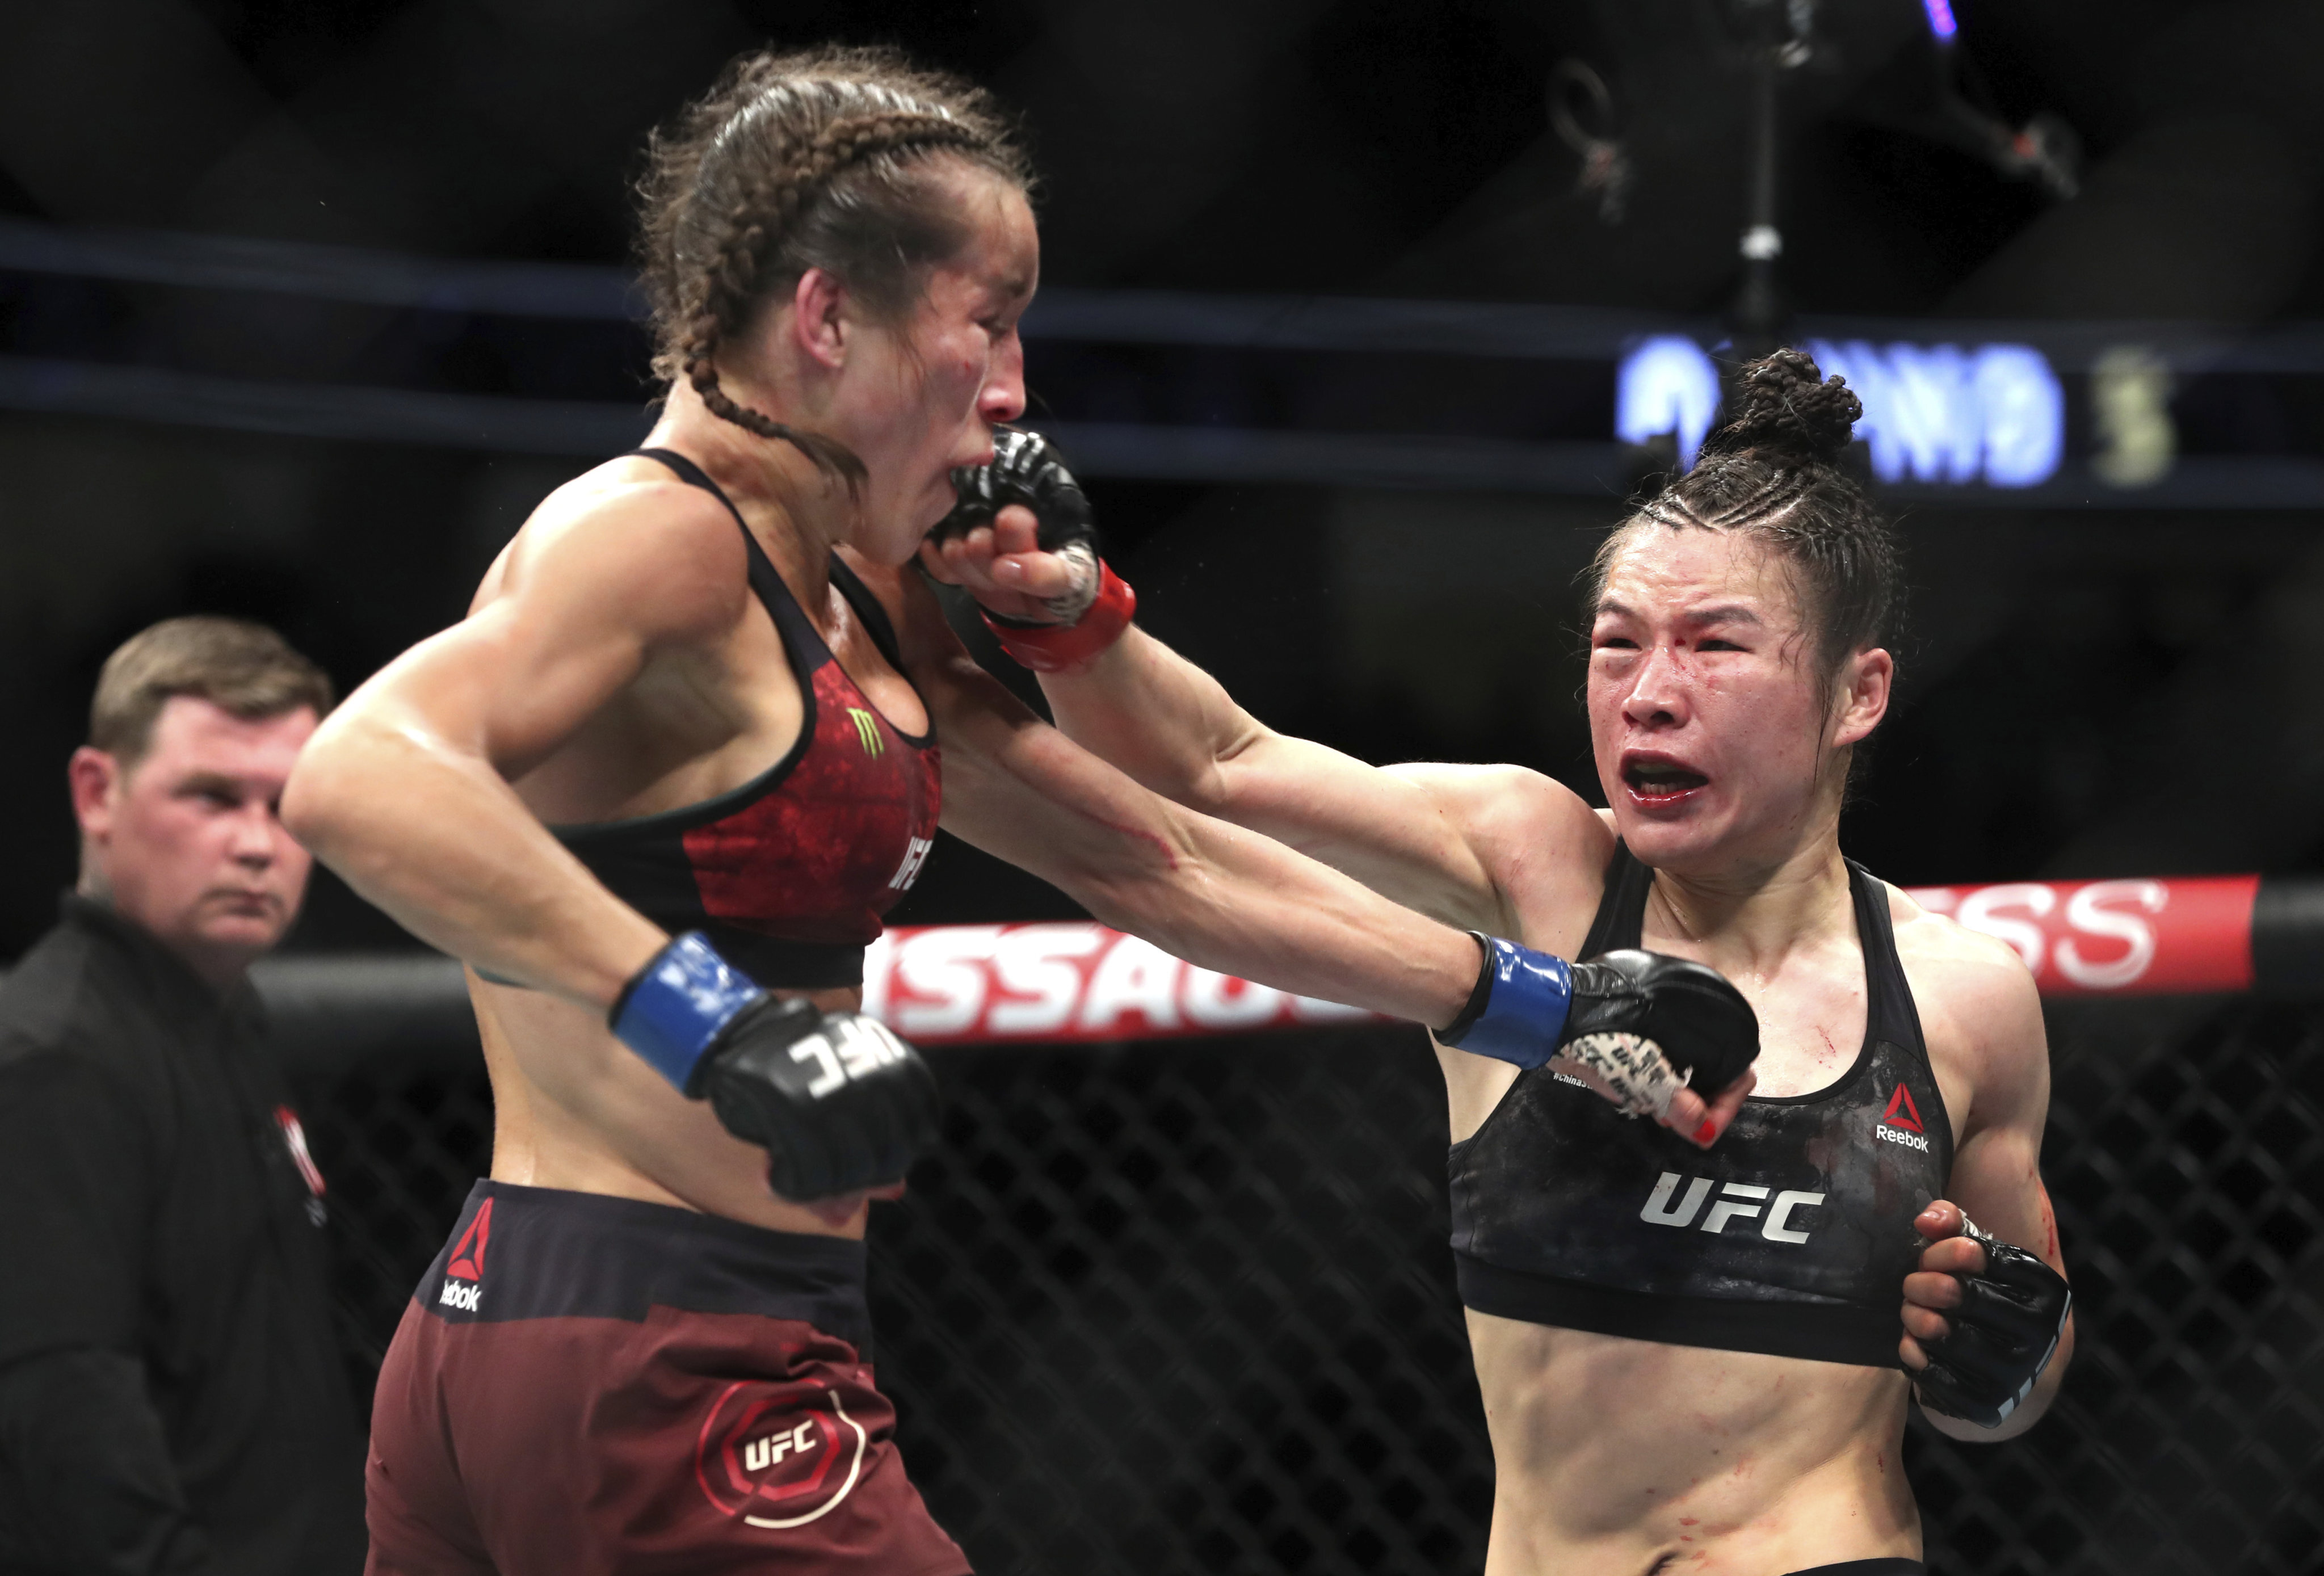 UFC women’s strawweight champion Weili Zhang (right) punches former champion Joanna Jedrzejczyk during UFC 248. Photo: AP